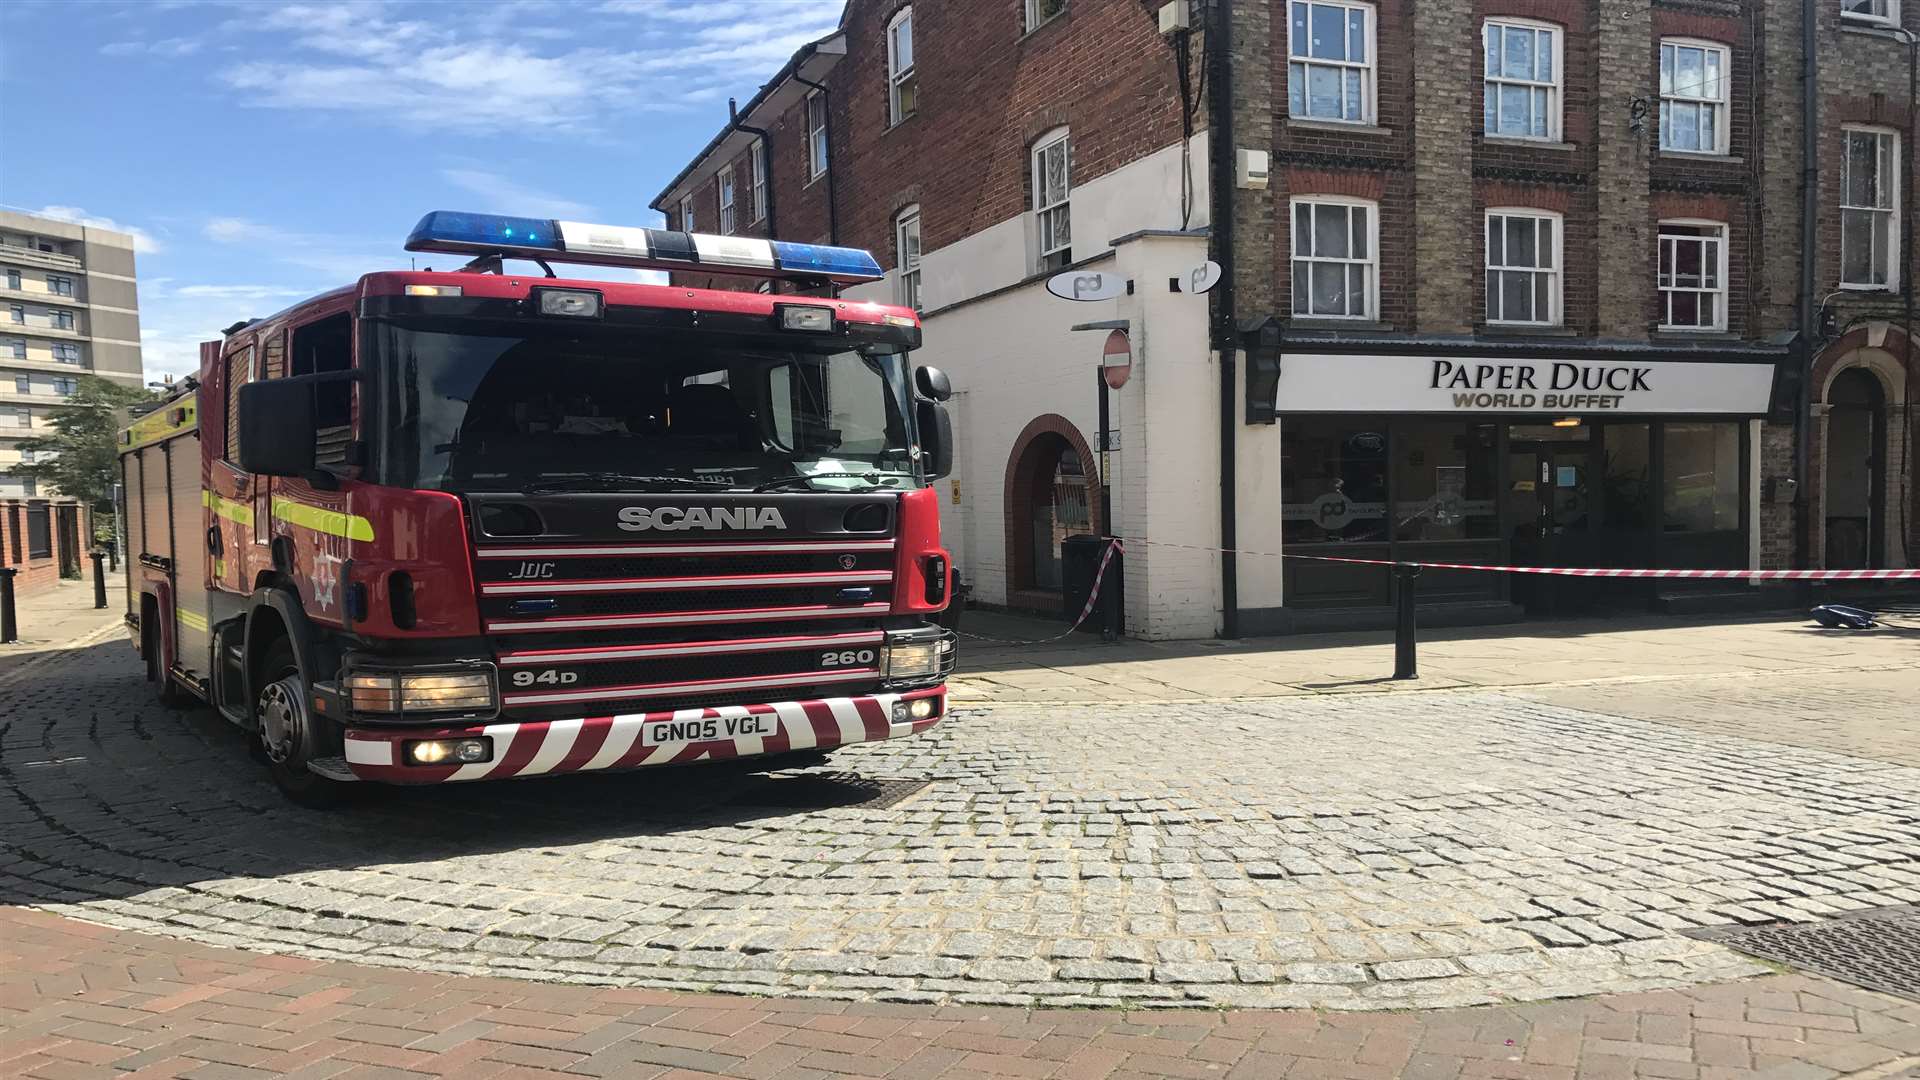 The fire brigade was called to The Paper Duck in Ashford